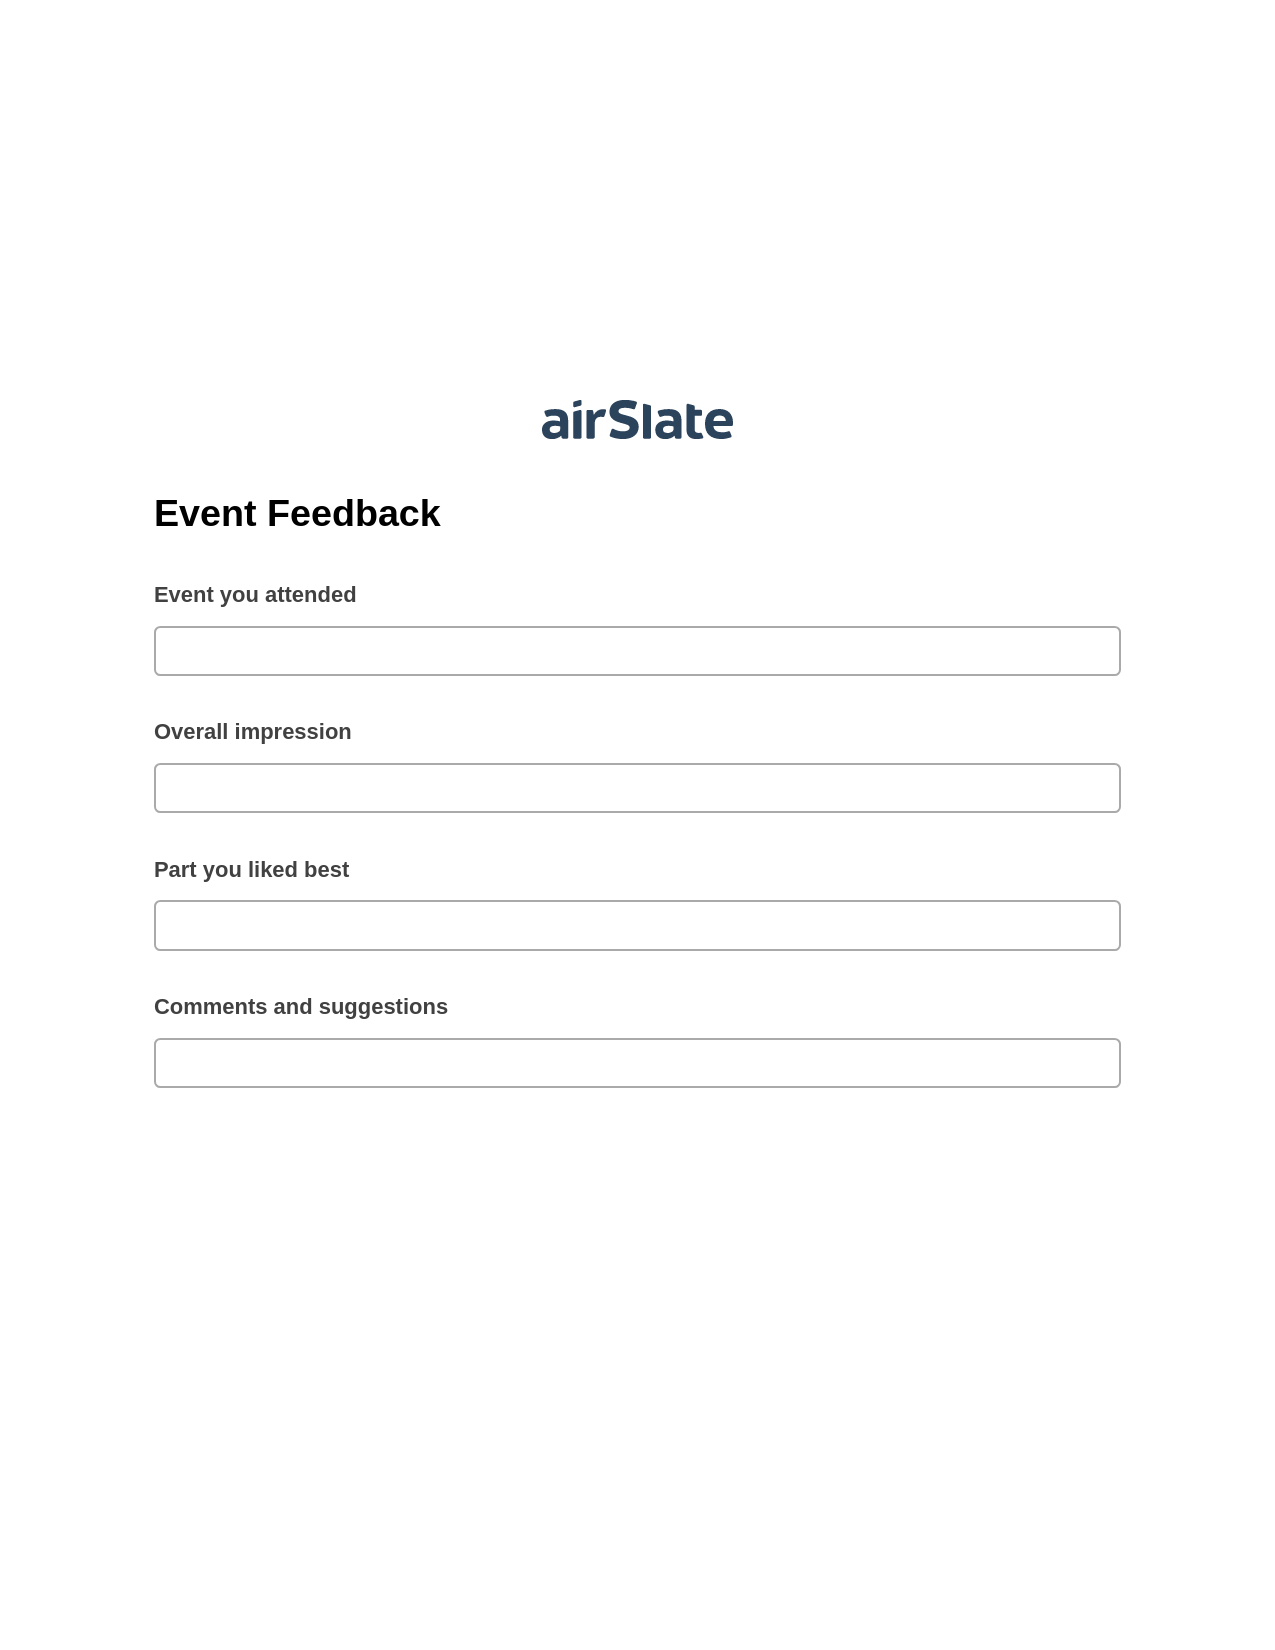 Event Feedback Pre-fill from another Slate Bot, Add Tags to Slate Bot, Export to Formstack Documents Bot